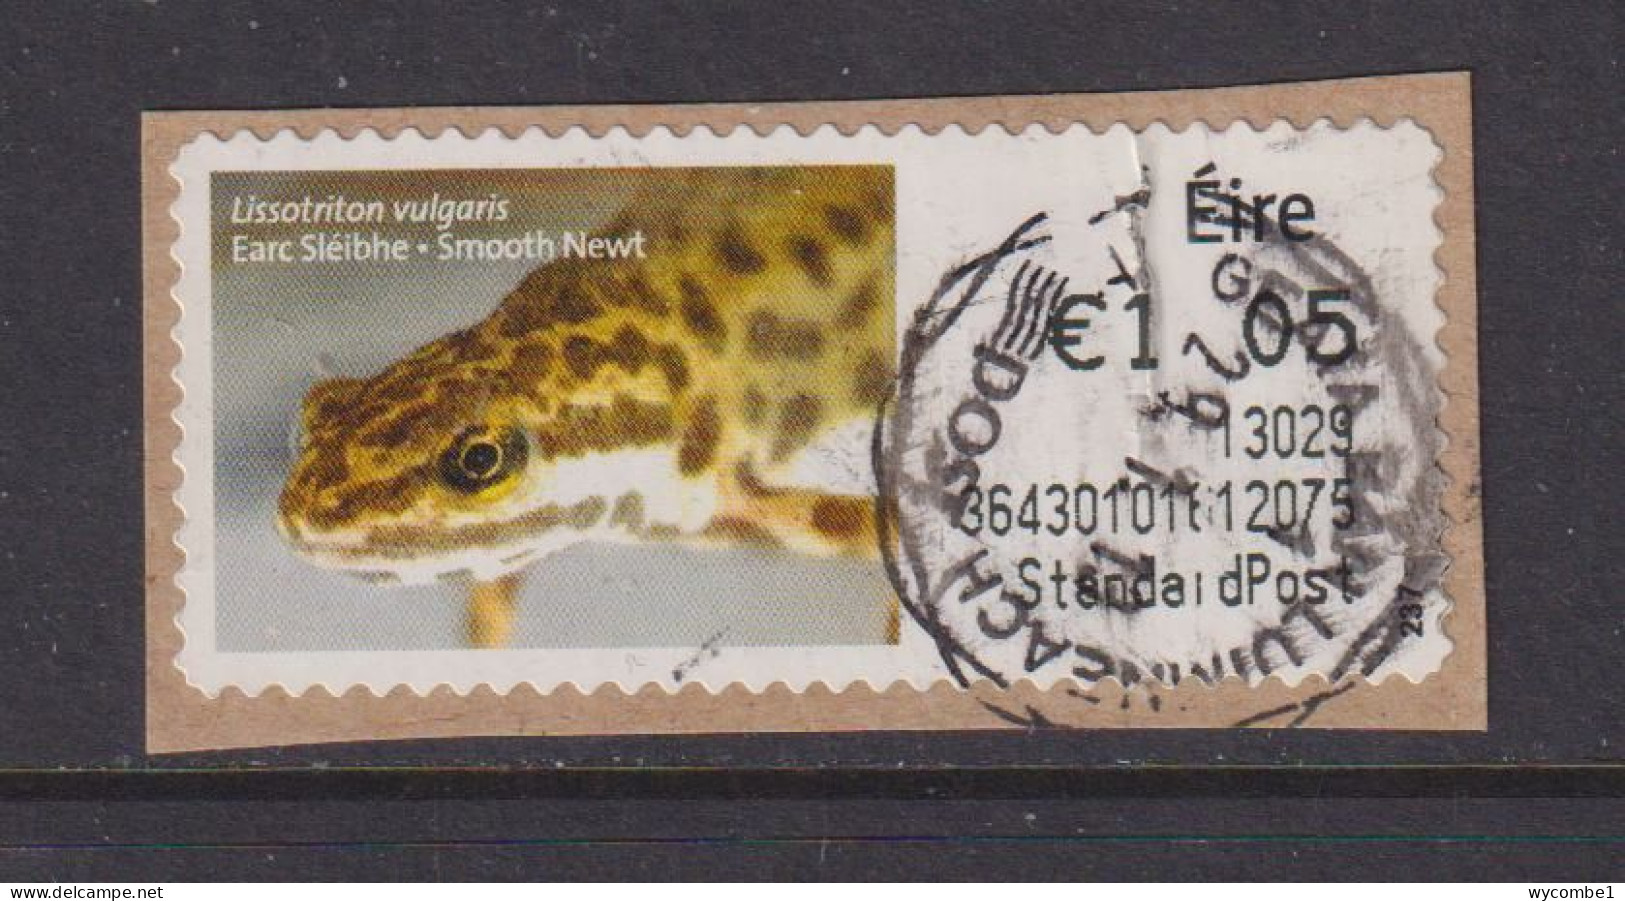 IRELAND  -  2012 Smooth Newt SOAR (Stamp On A Roll)  CDS  Used On Piece As Scan - Oblitérés